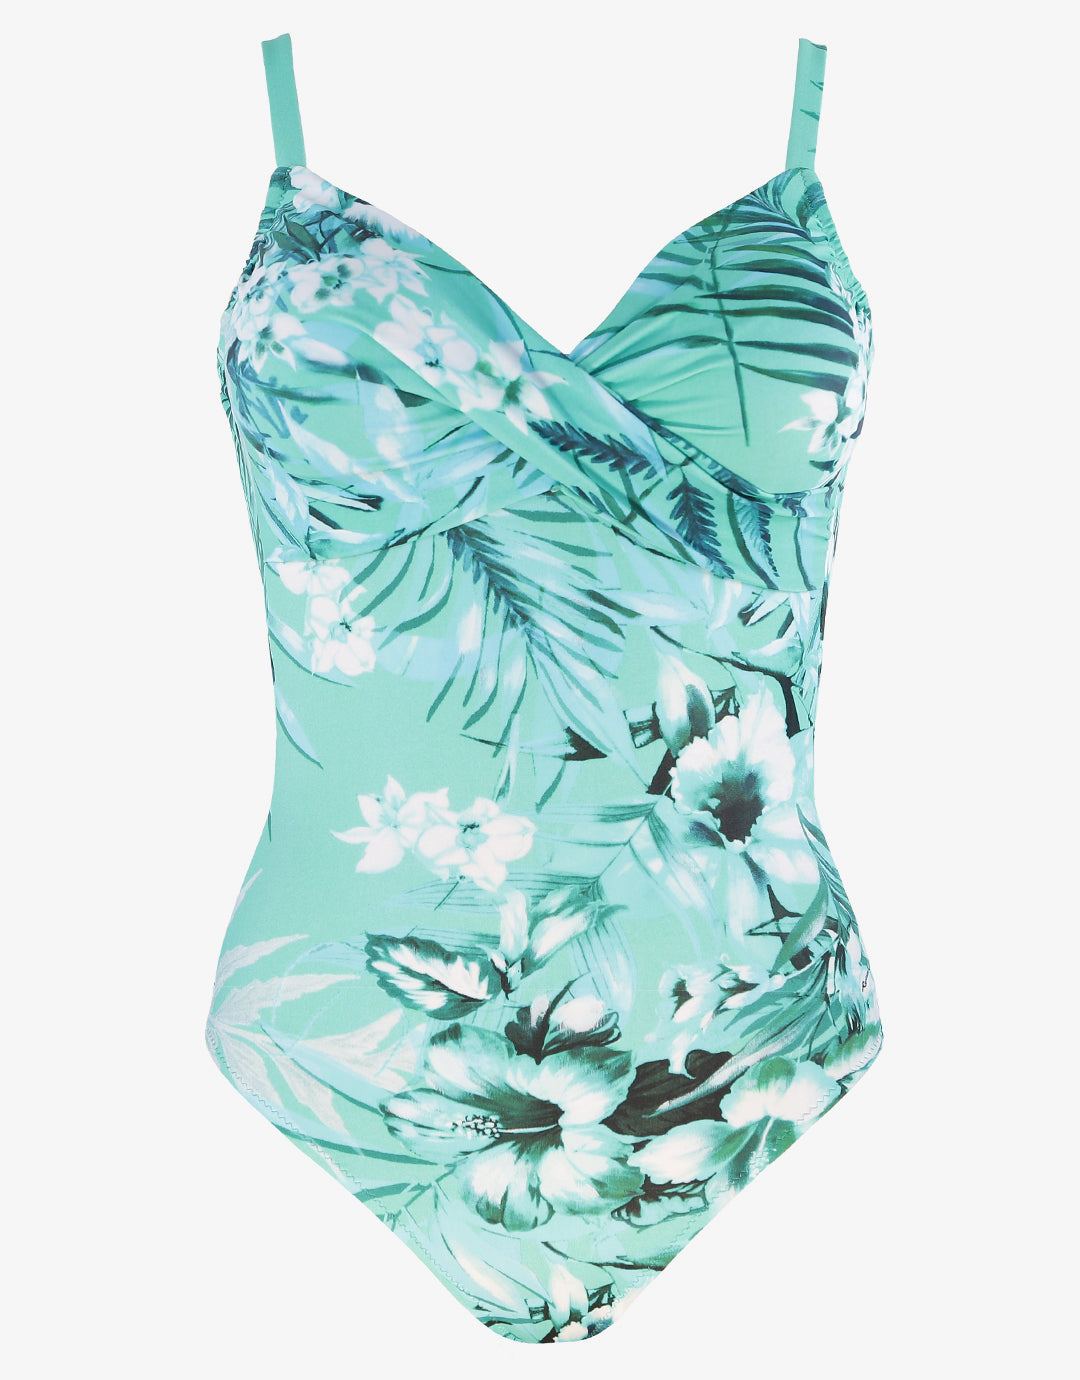 Mentha - Underwired Crossover Swimsuit - Green - Simply Beach UK